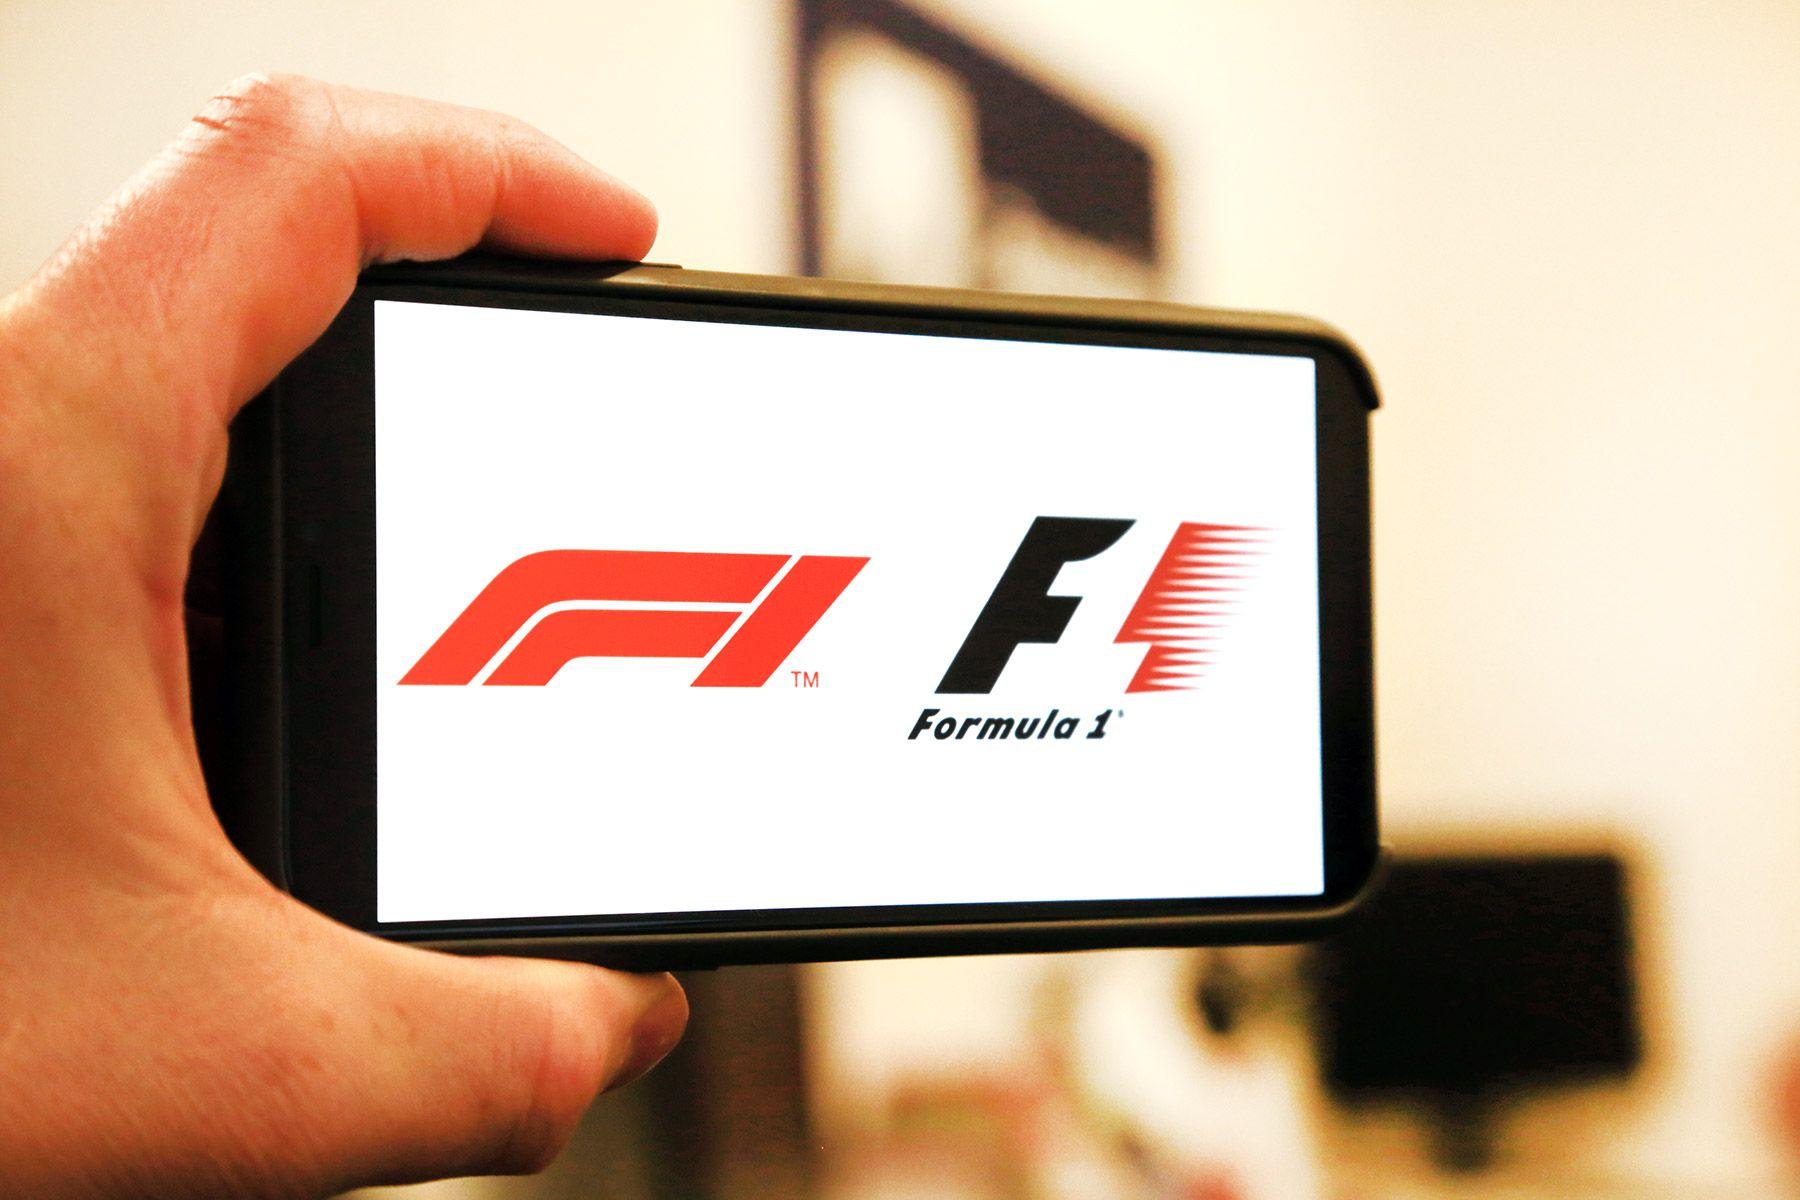 Do Logo - New F1 logo - Why did they change it? | Squarebird | Graphic Design